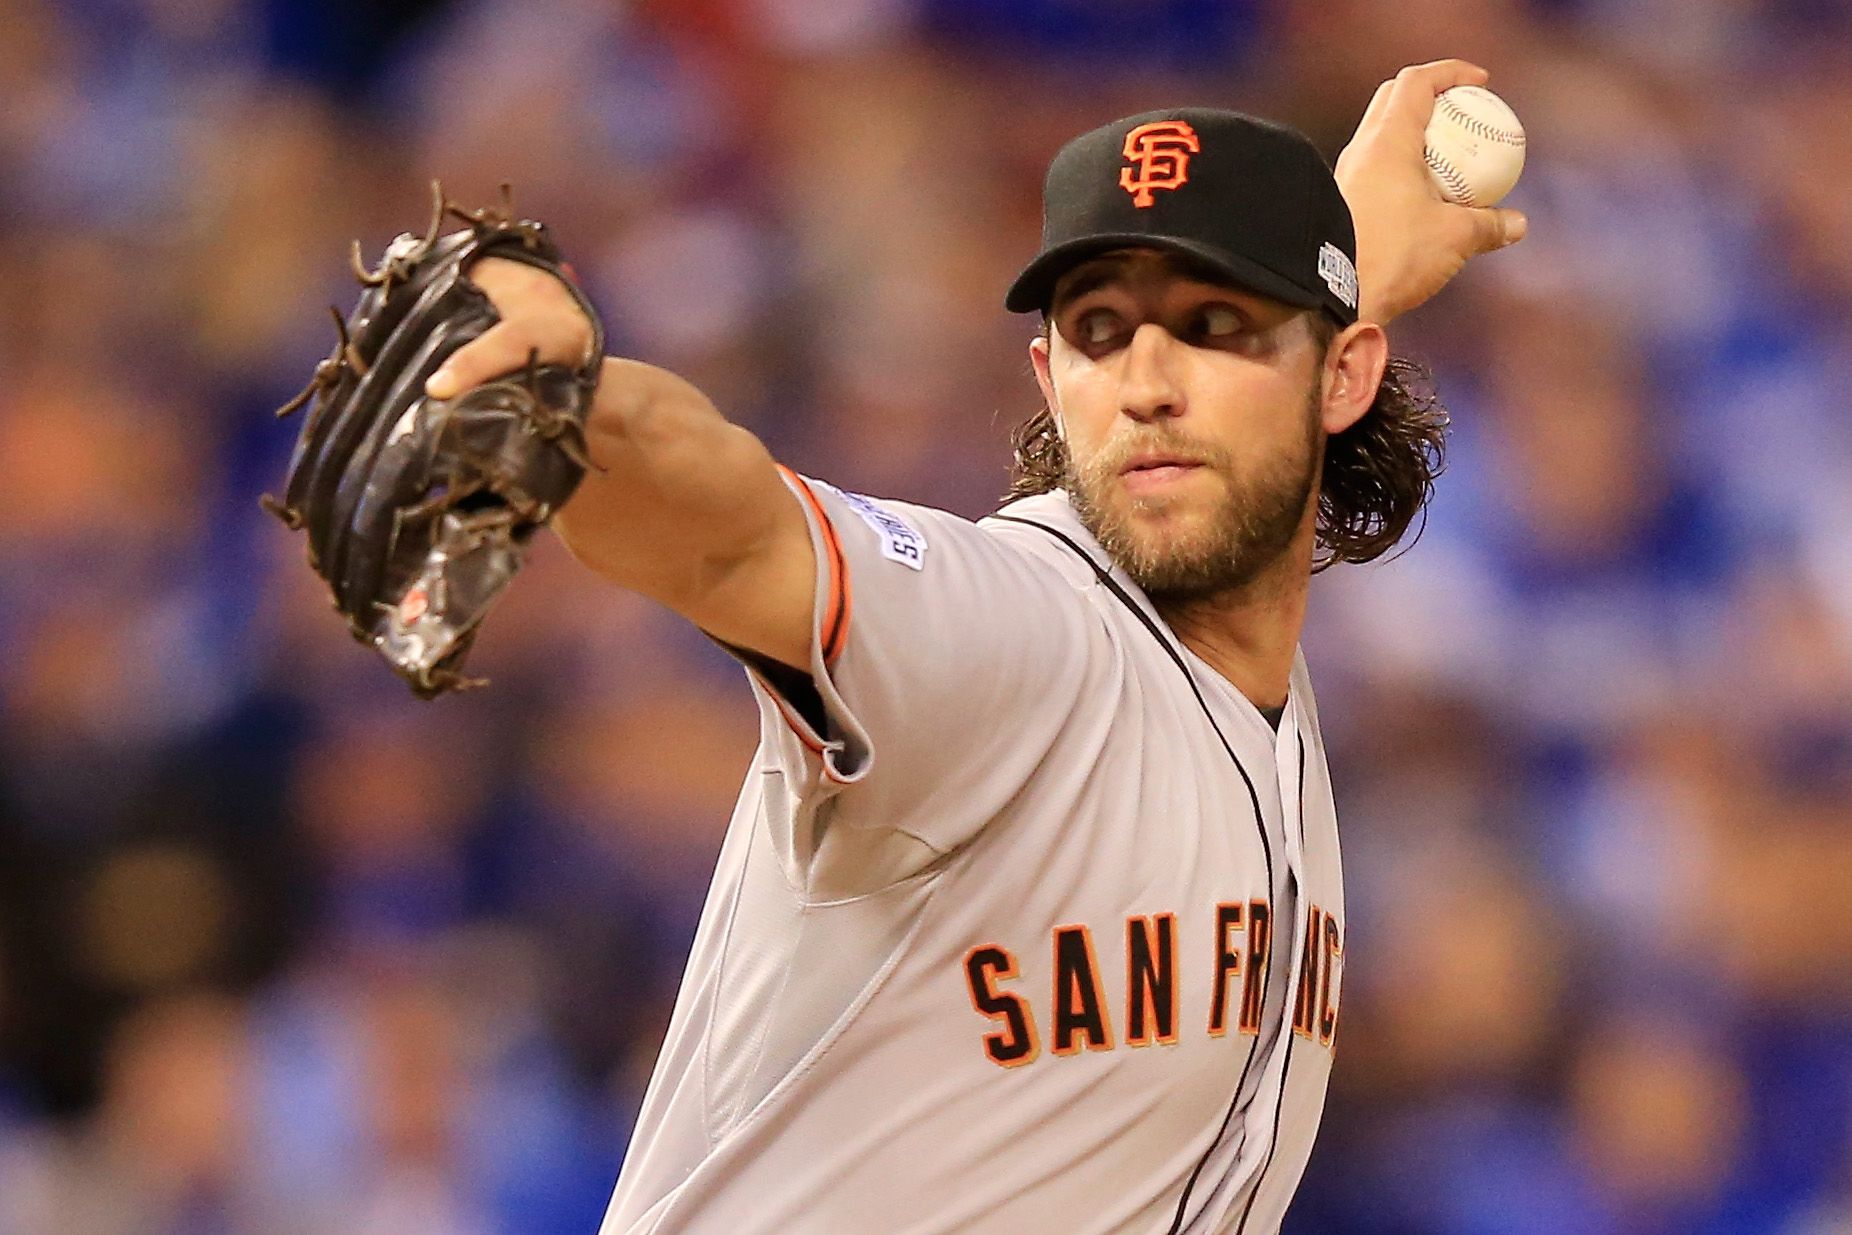 Madison Bumgarner laughs at question about how he would pitch to himself 